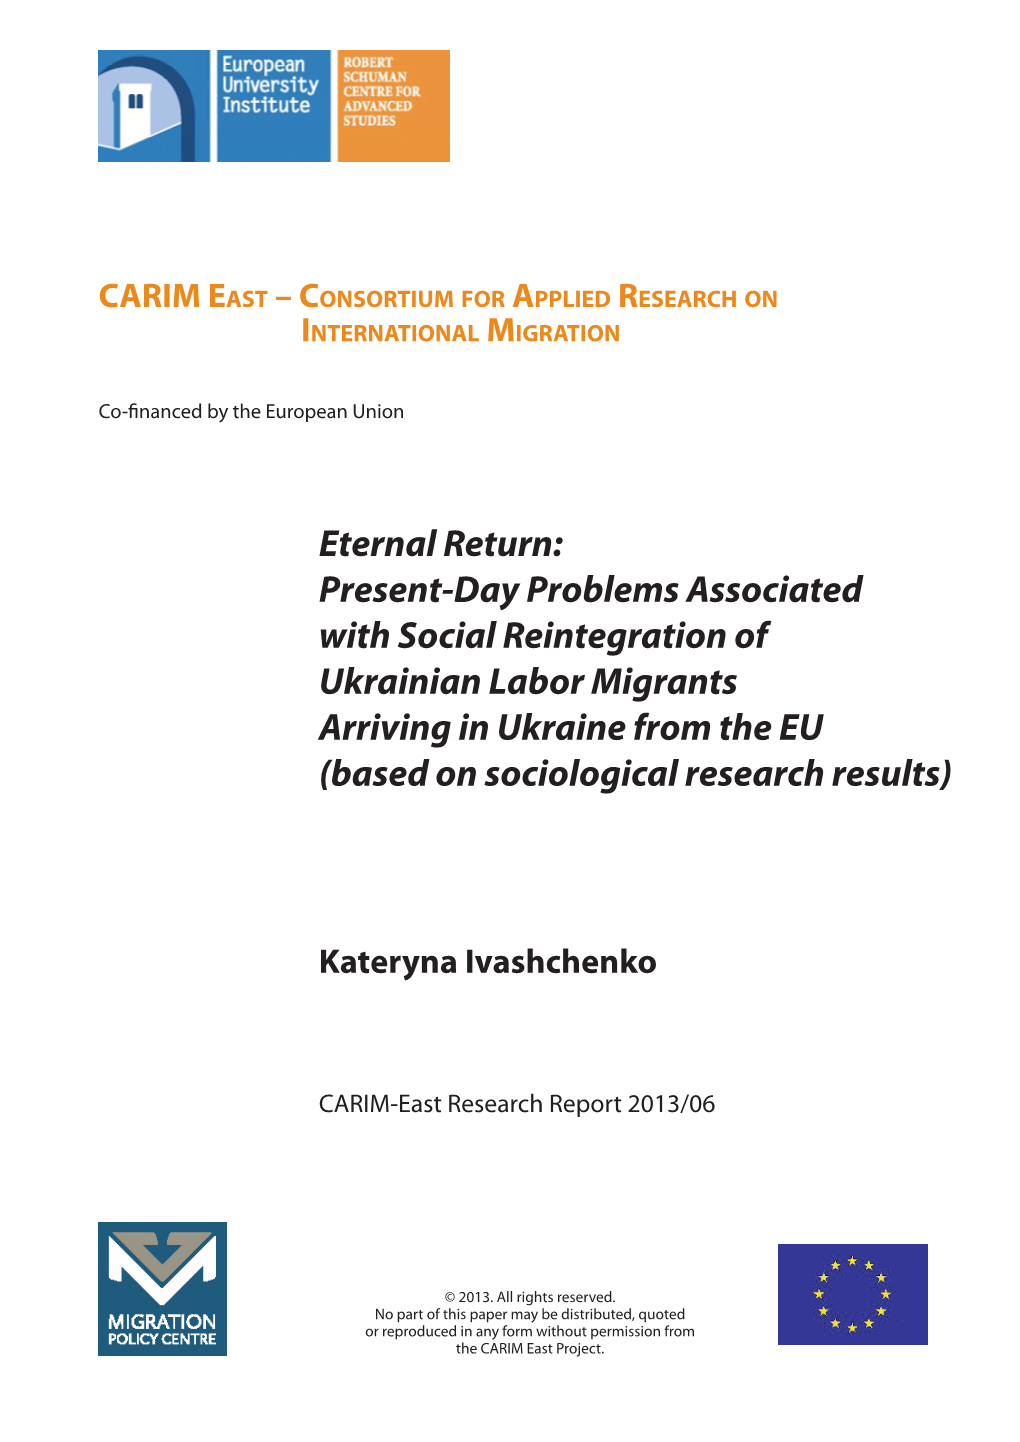 Present-Day Problems Associated with Social Reintegration of Ukrainian Labor Migrants Arriving in Ukraine from the EU (Based on Sociological Research Results)